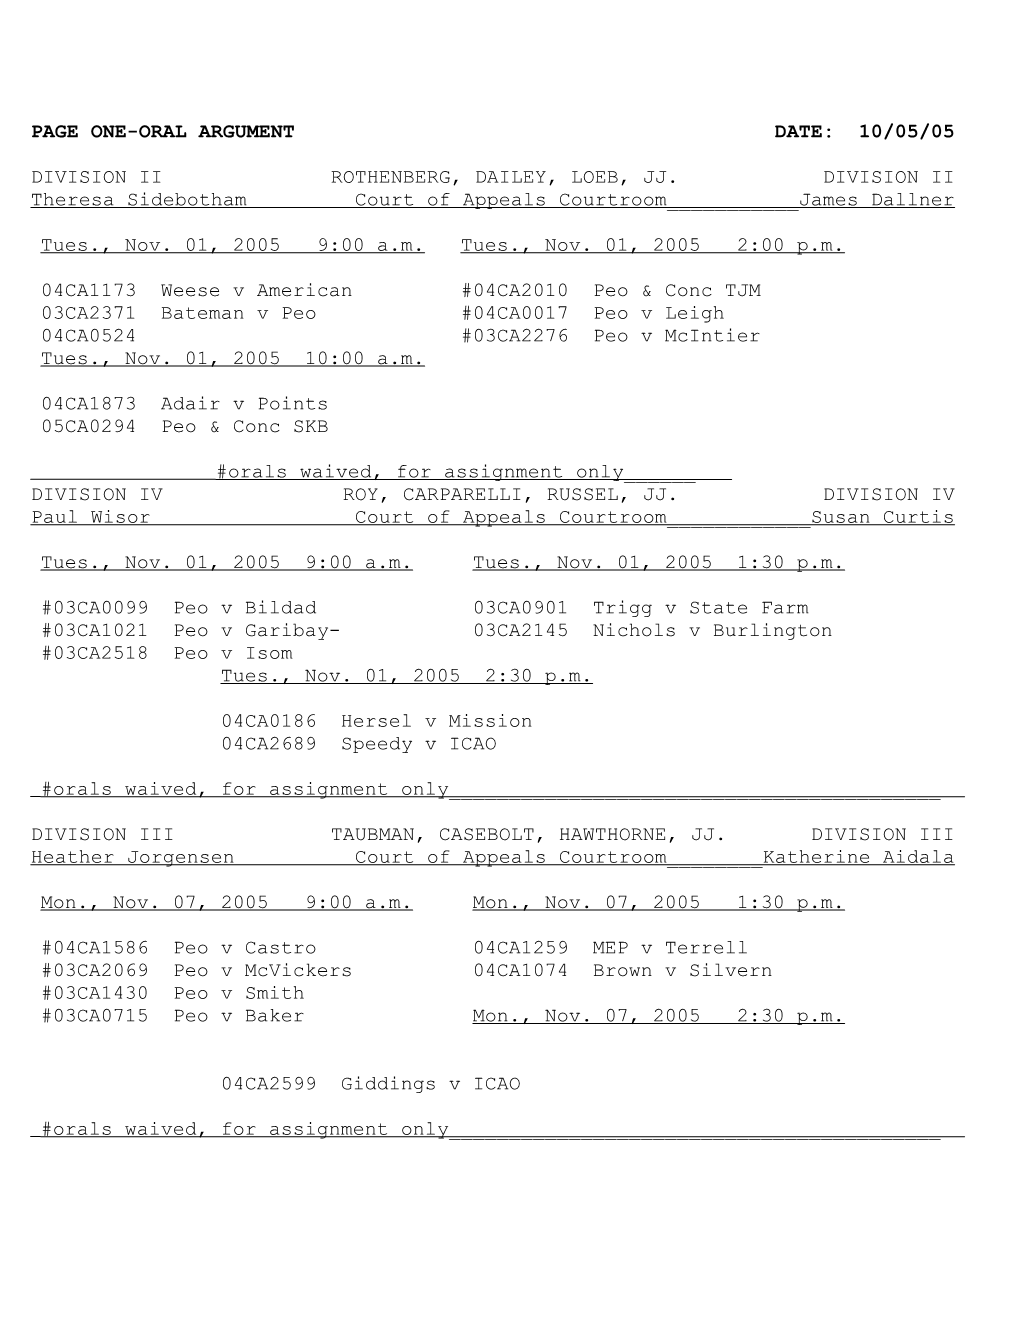 Page One-Oral Argument Date: 10/05/05